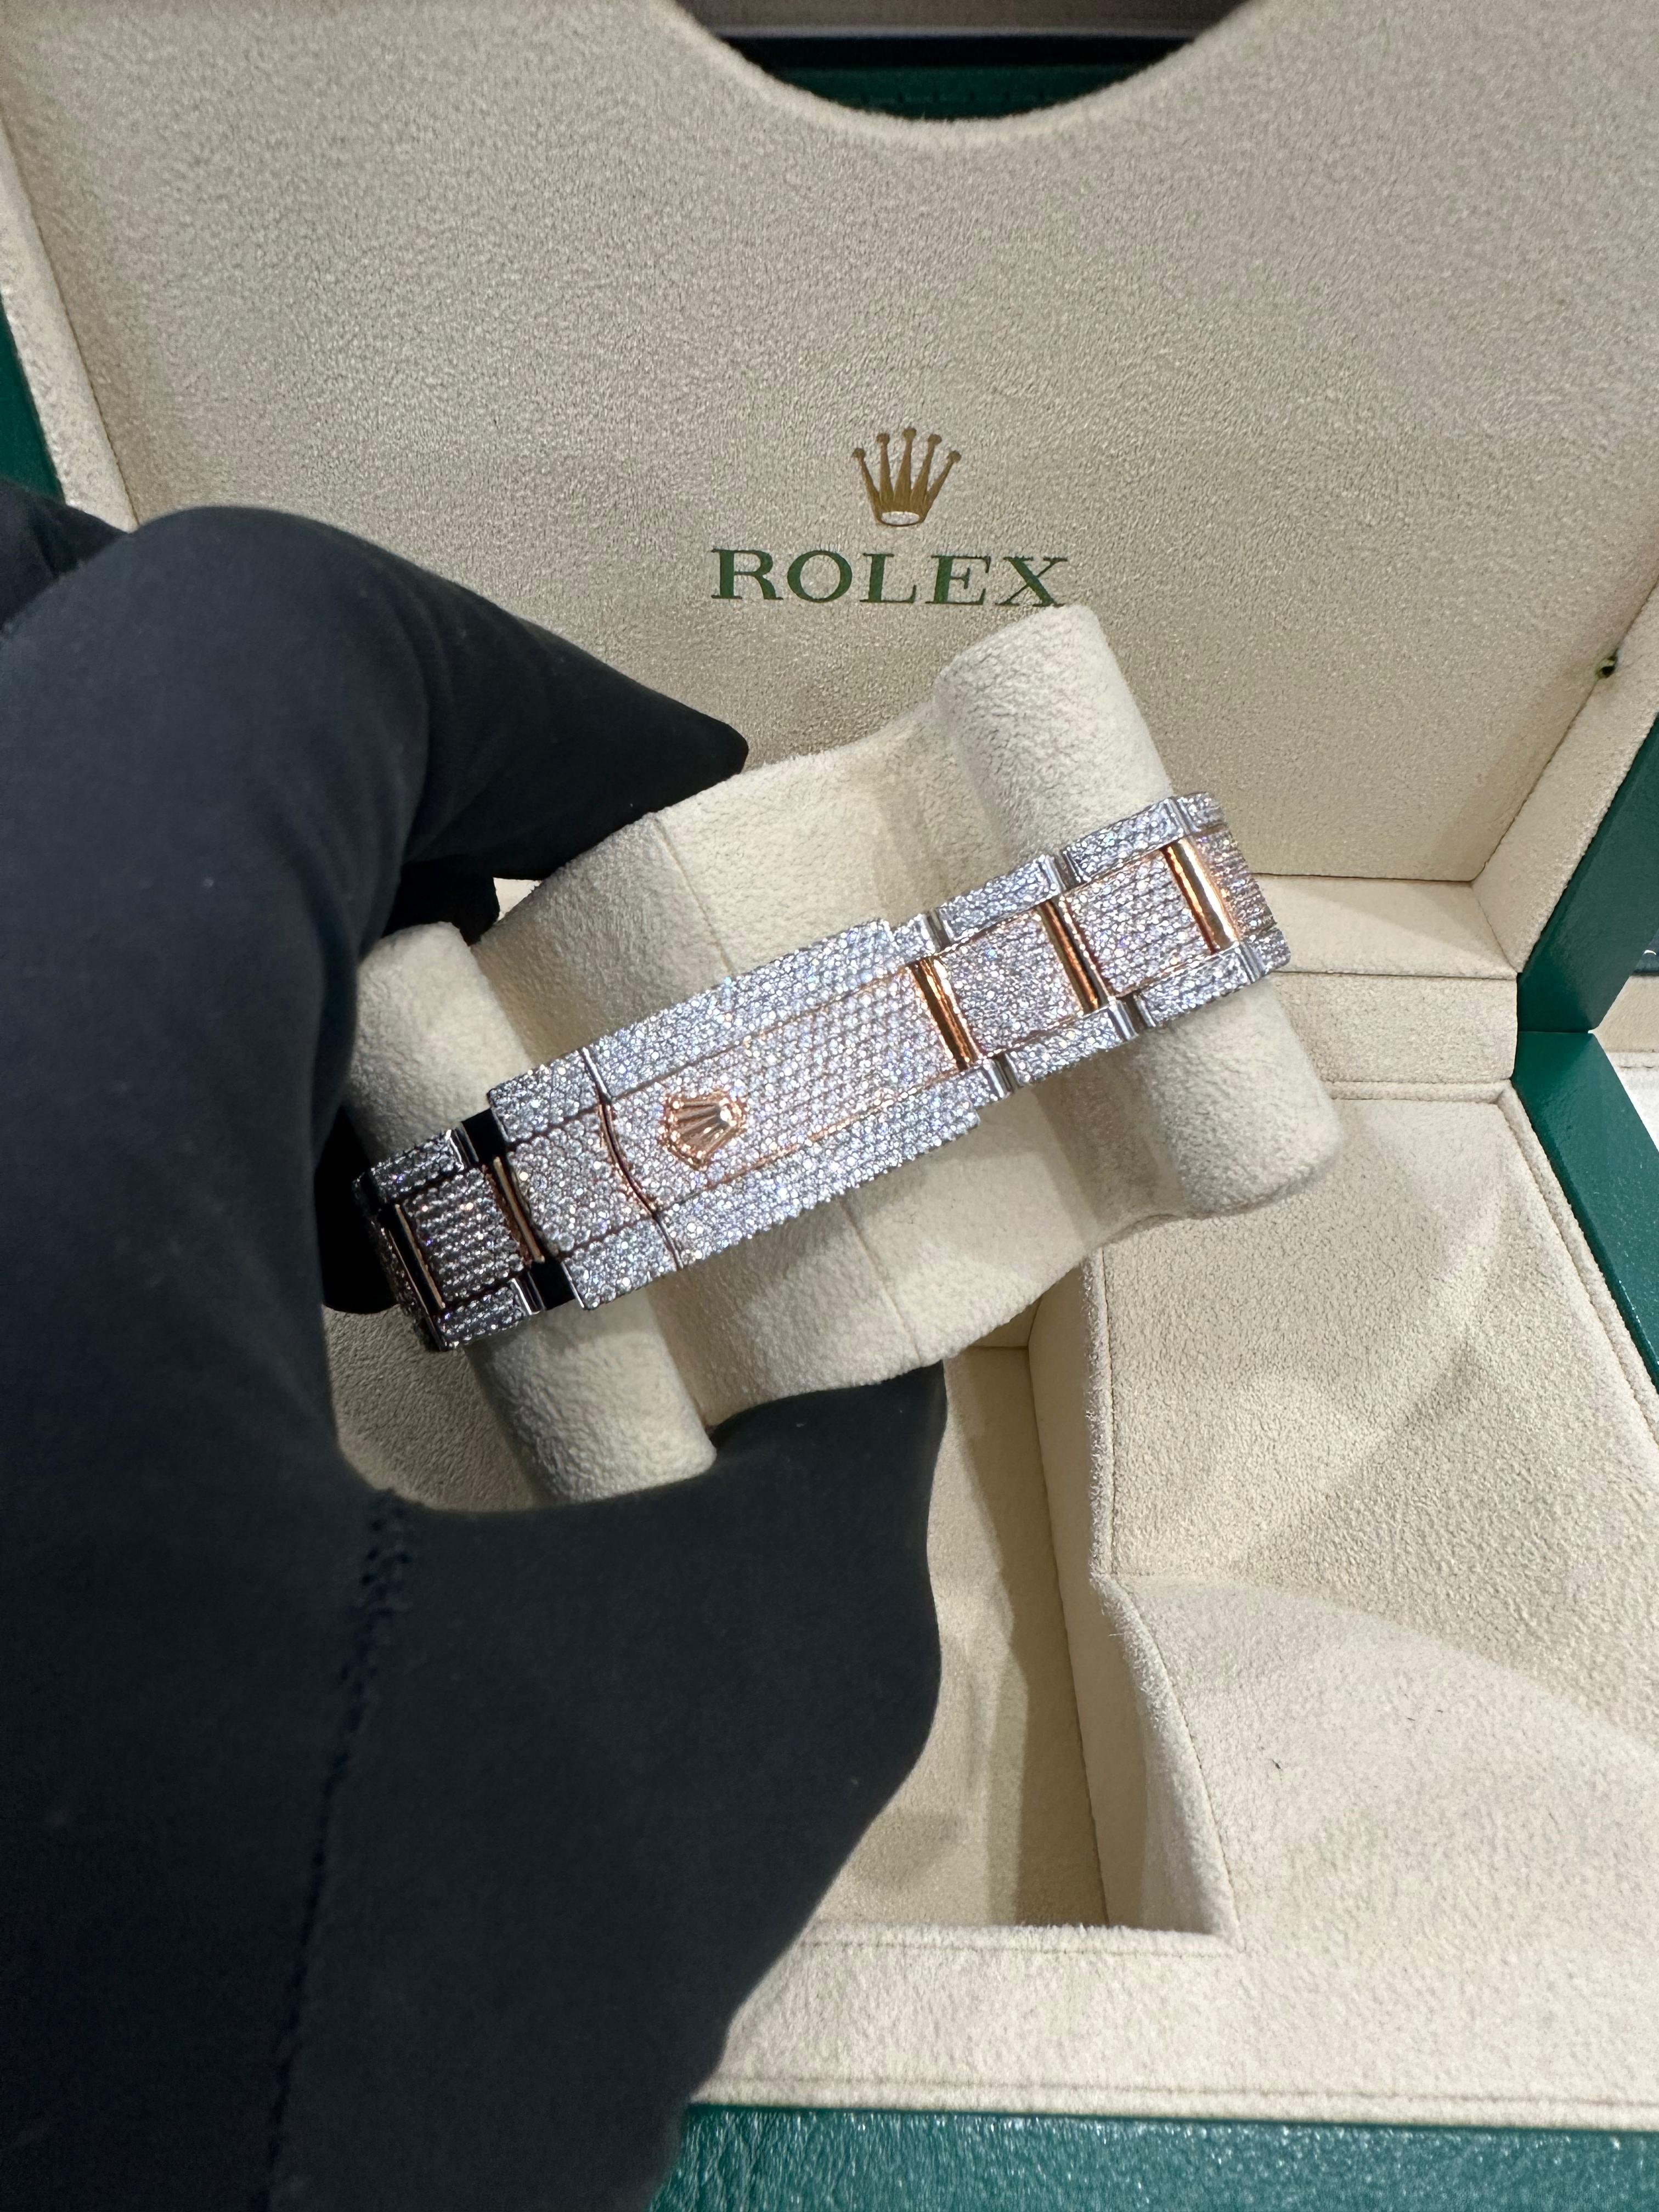 Rolex Two Tone Rose Gold Datejust 41 Oyster Bracelet Honey Comb Diamond Set With Chocolate Baguette Dial